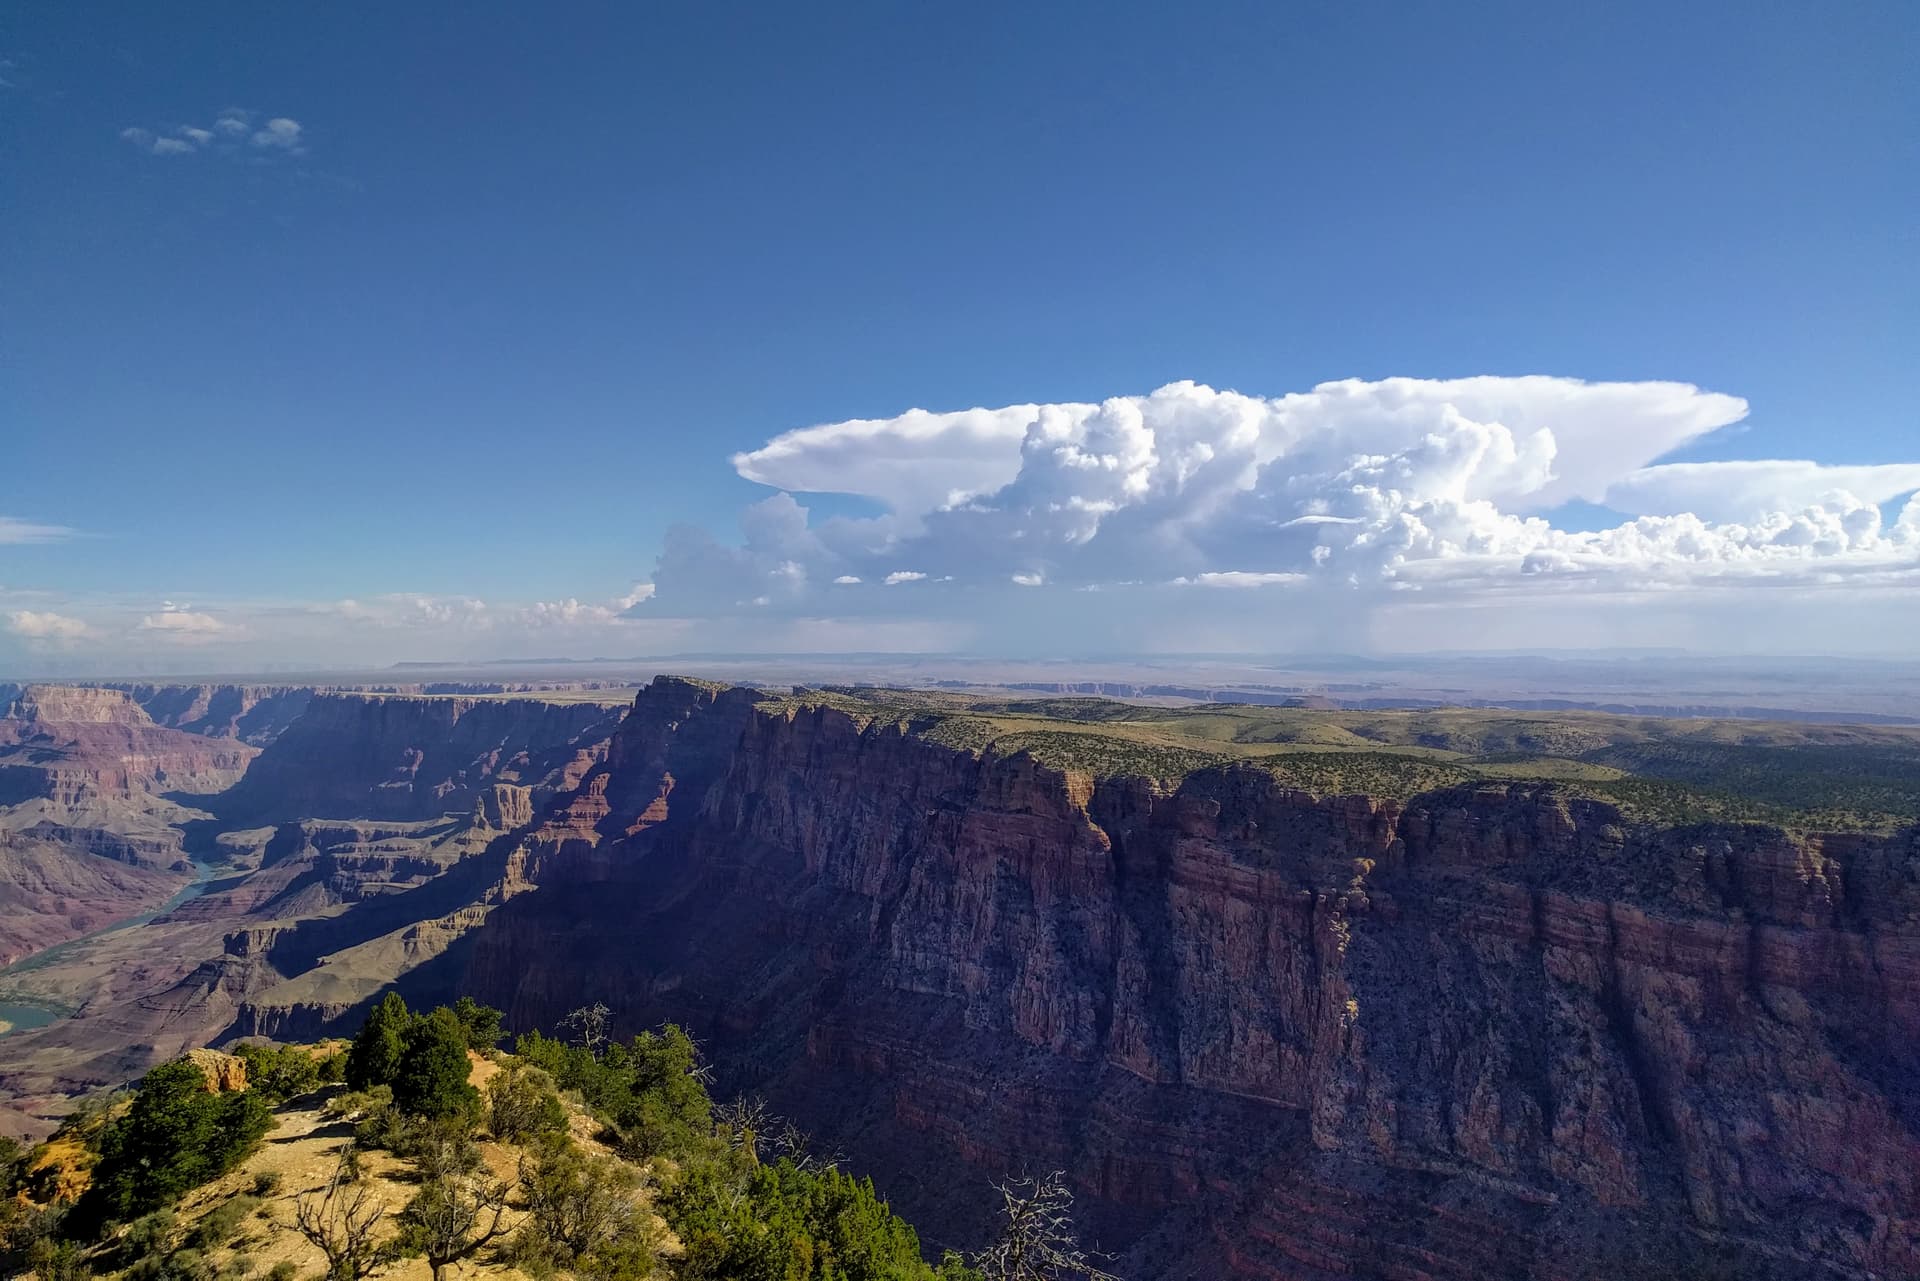 Looking across the South Rim of the Grand Canyon, and into the desert beyond. Rain clouds gather in the distance.